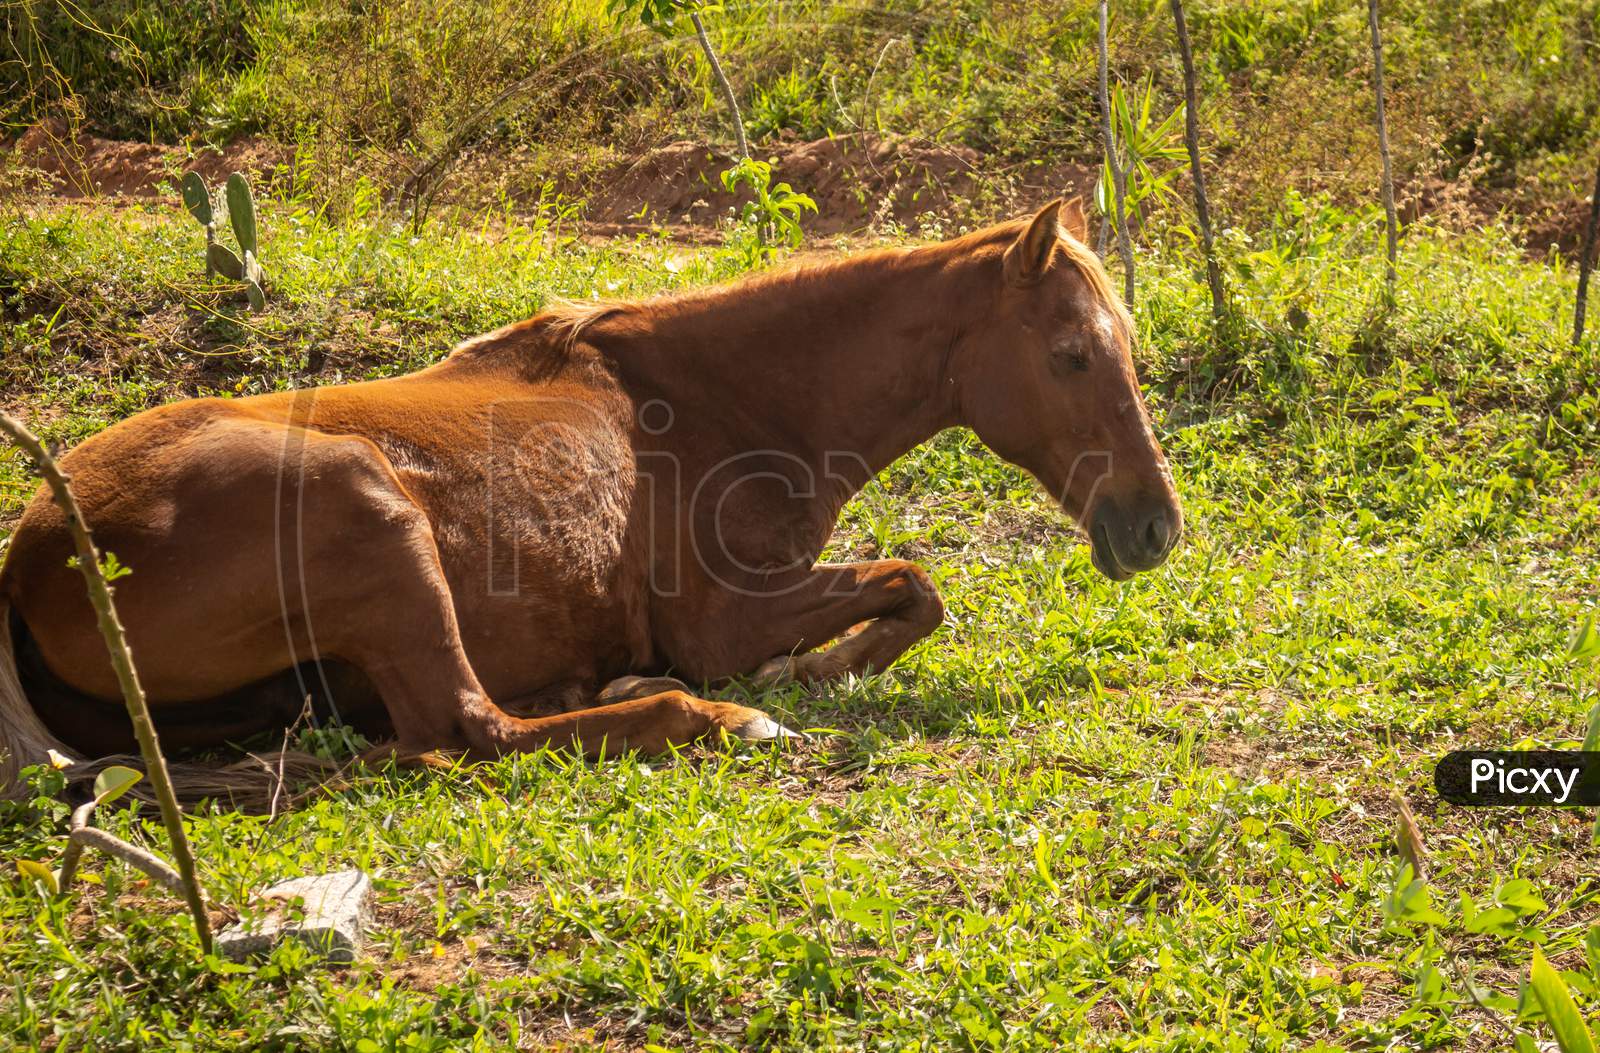 Huge Brown Horse Resting Lying In The Grass.